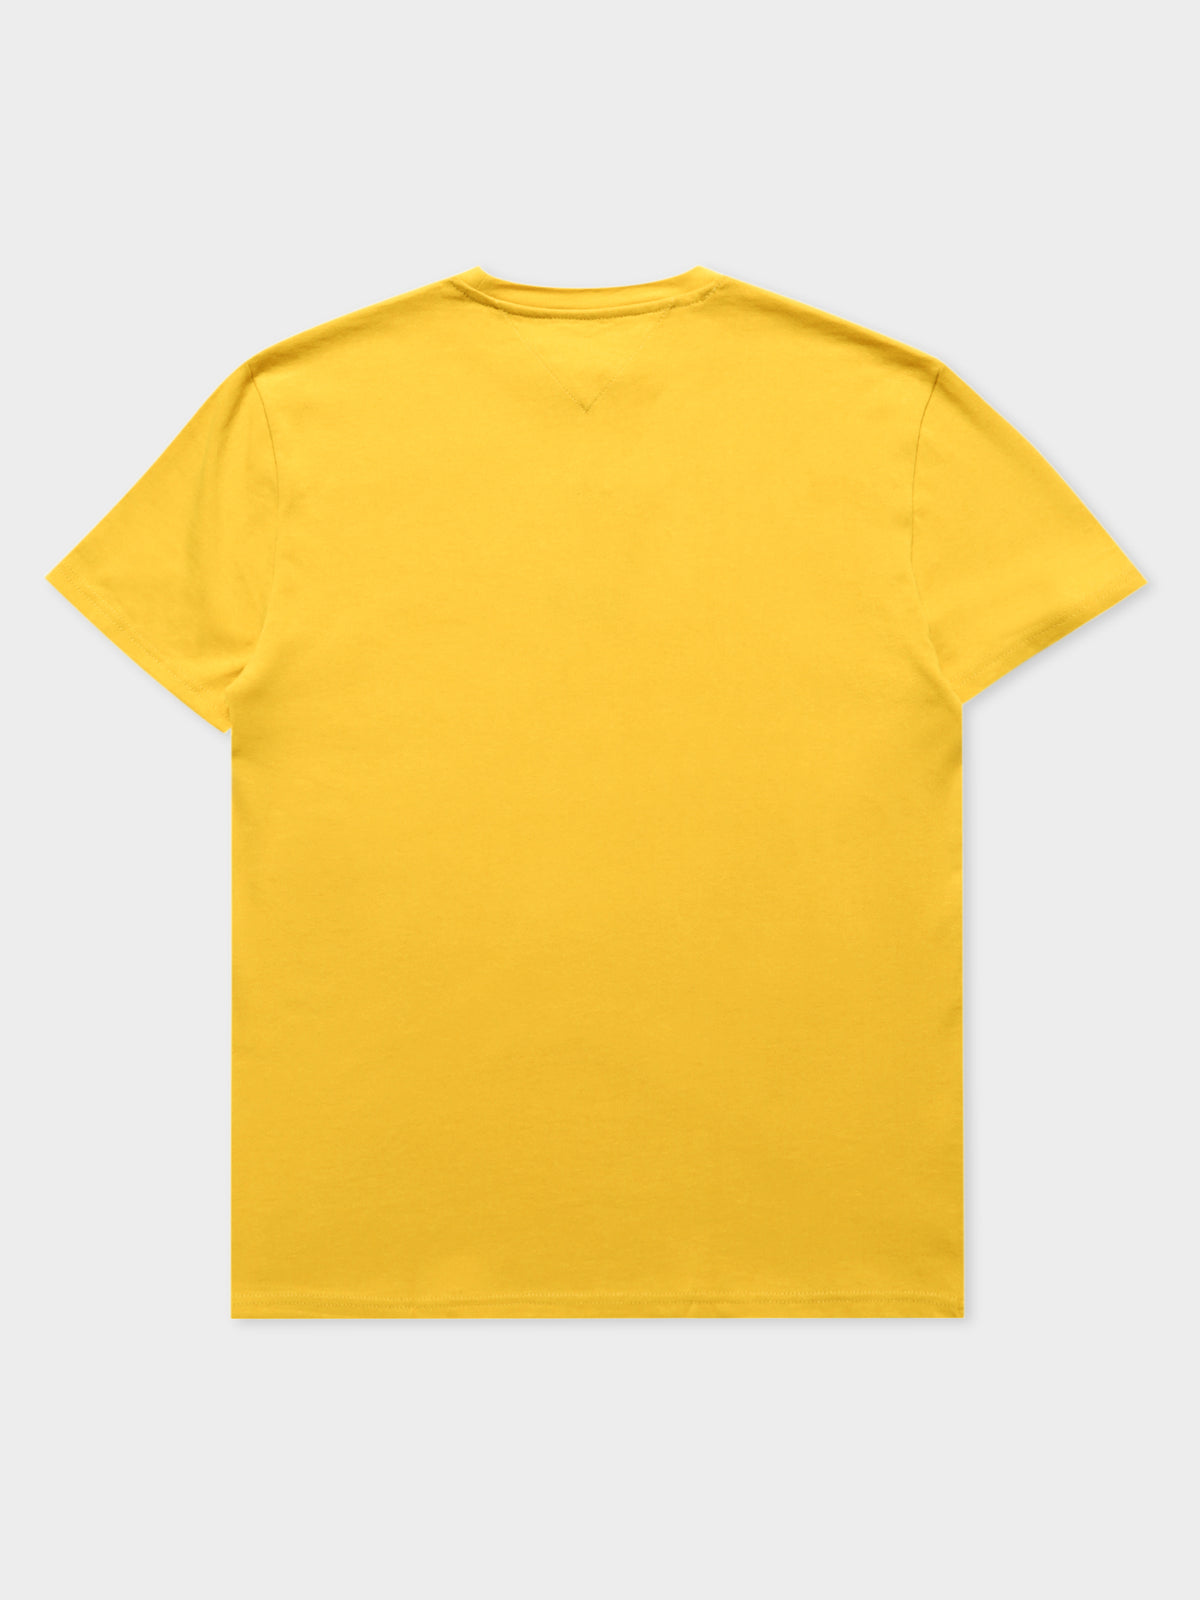 Small Flag T-Shirt in Star Fruit Yellow